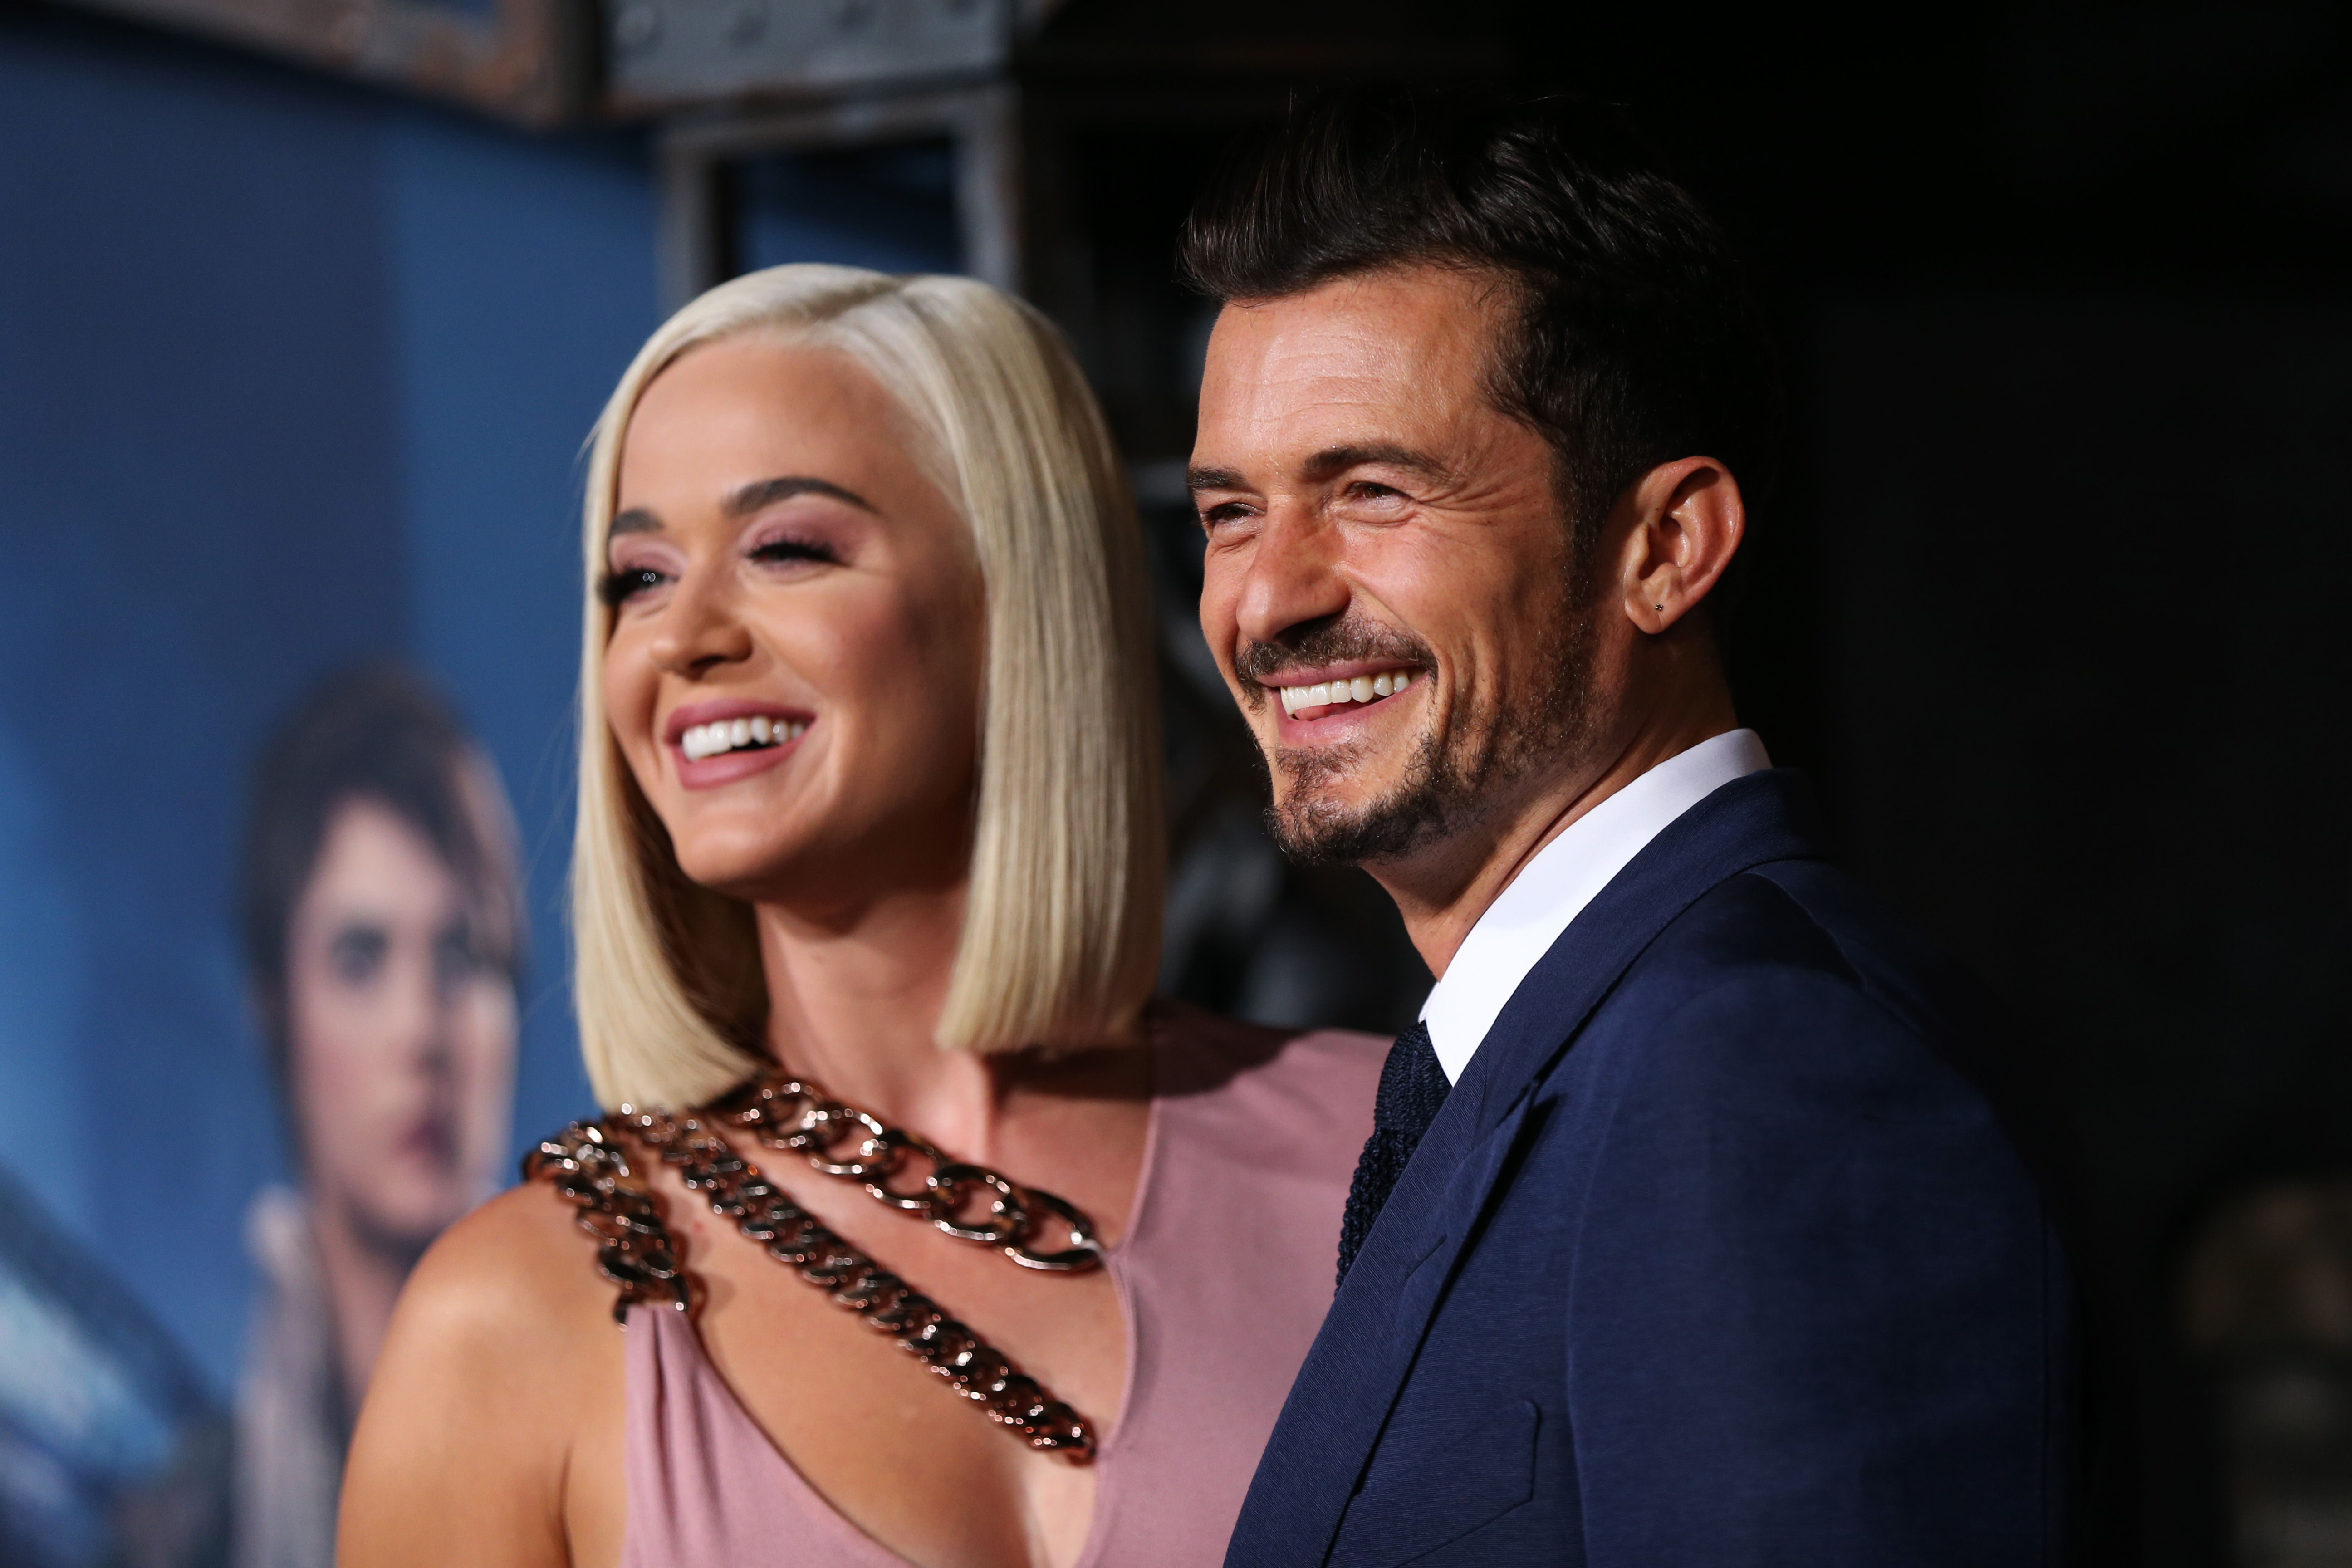 Is Katy Perry married to Orlando Bloom?